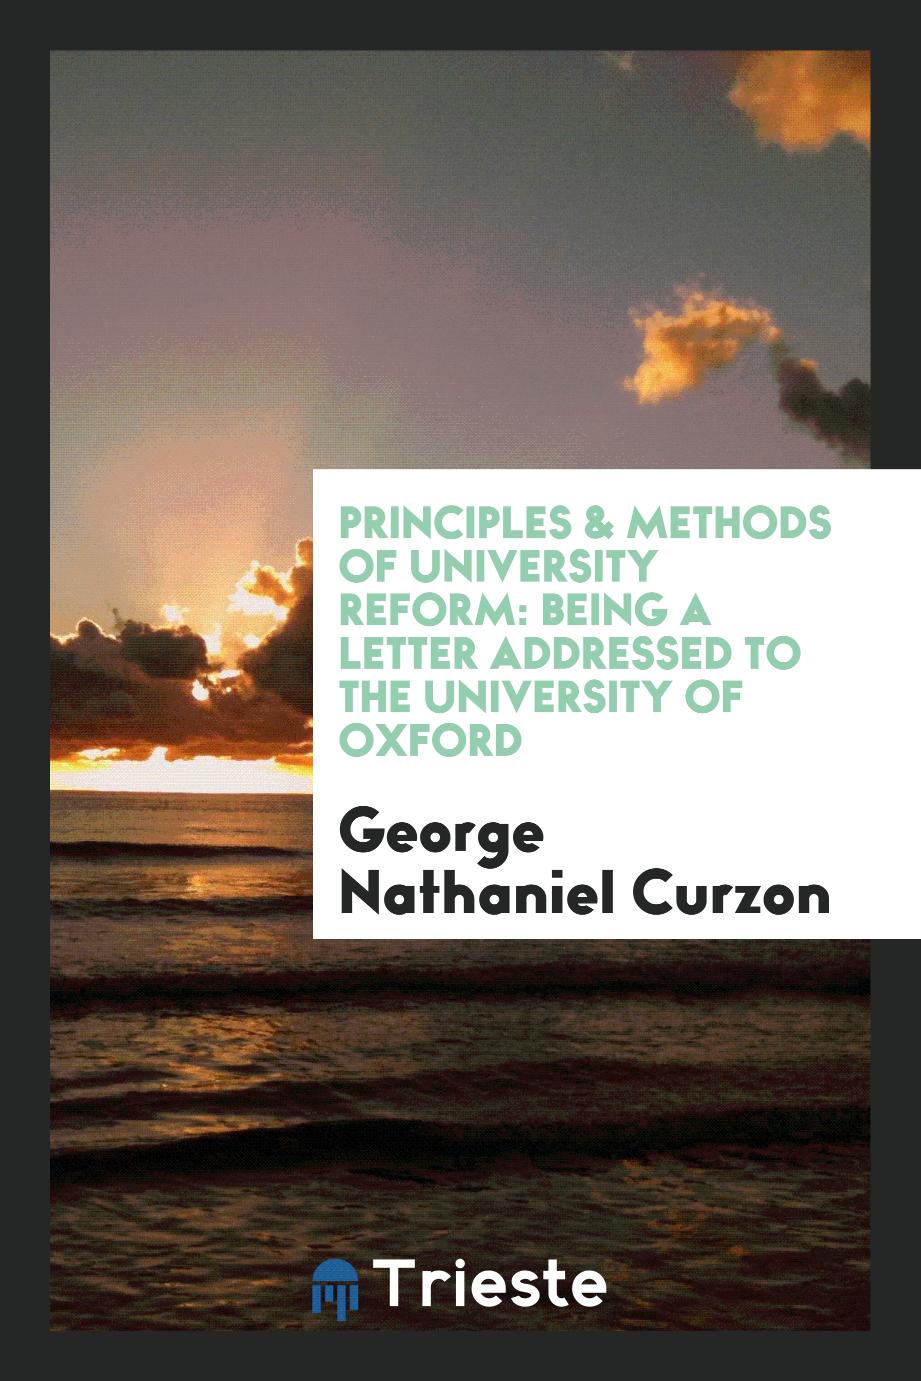 Principles & methods of university reform: being a letter addressed to the University of Oxford